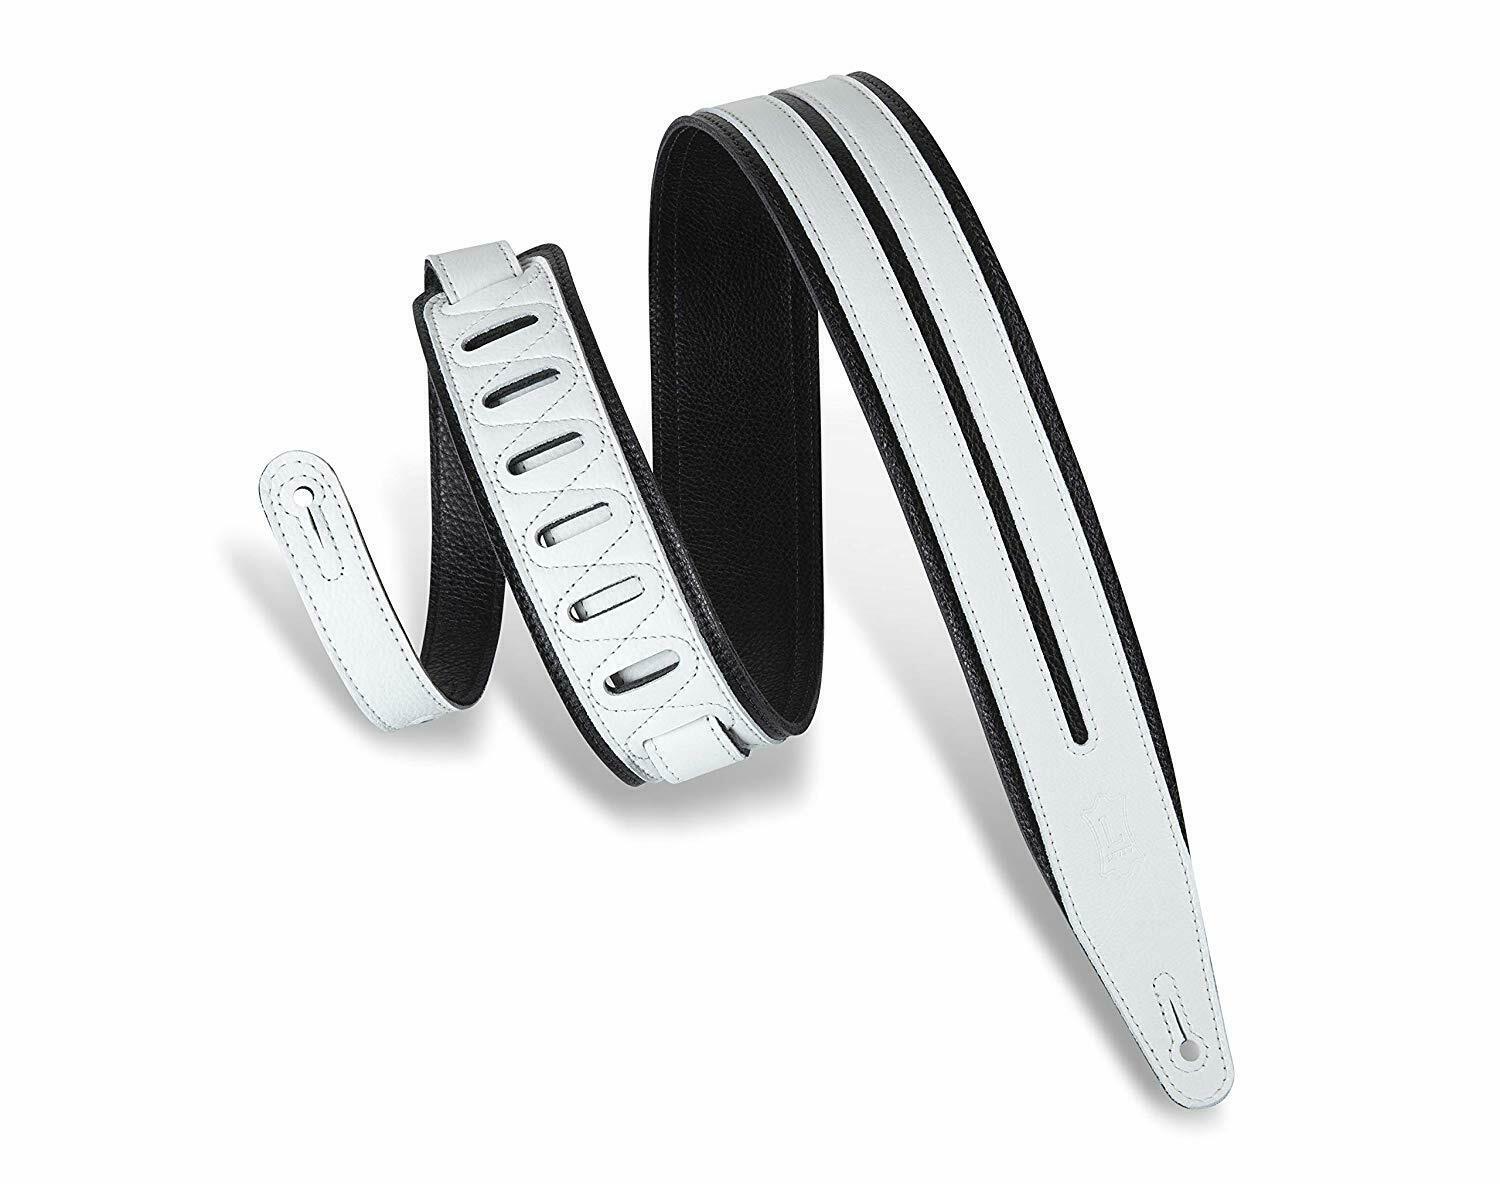 Levy's - MG317DRS-BLKWHT - 2 1/2" Wide Garment Leather Straps - White/Black - $69.99